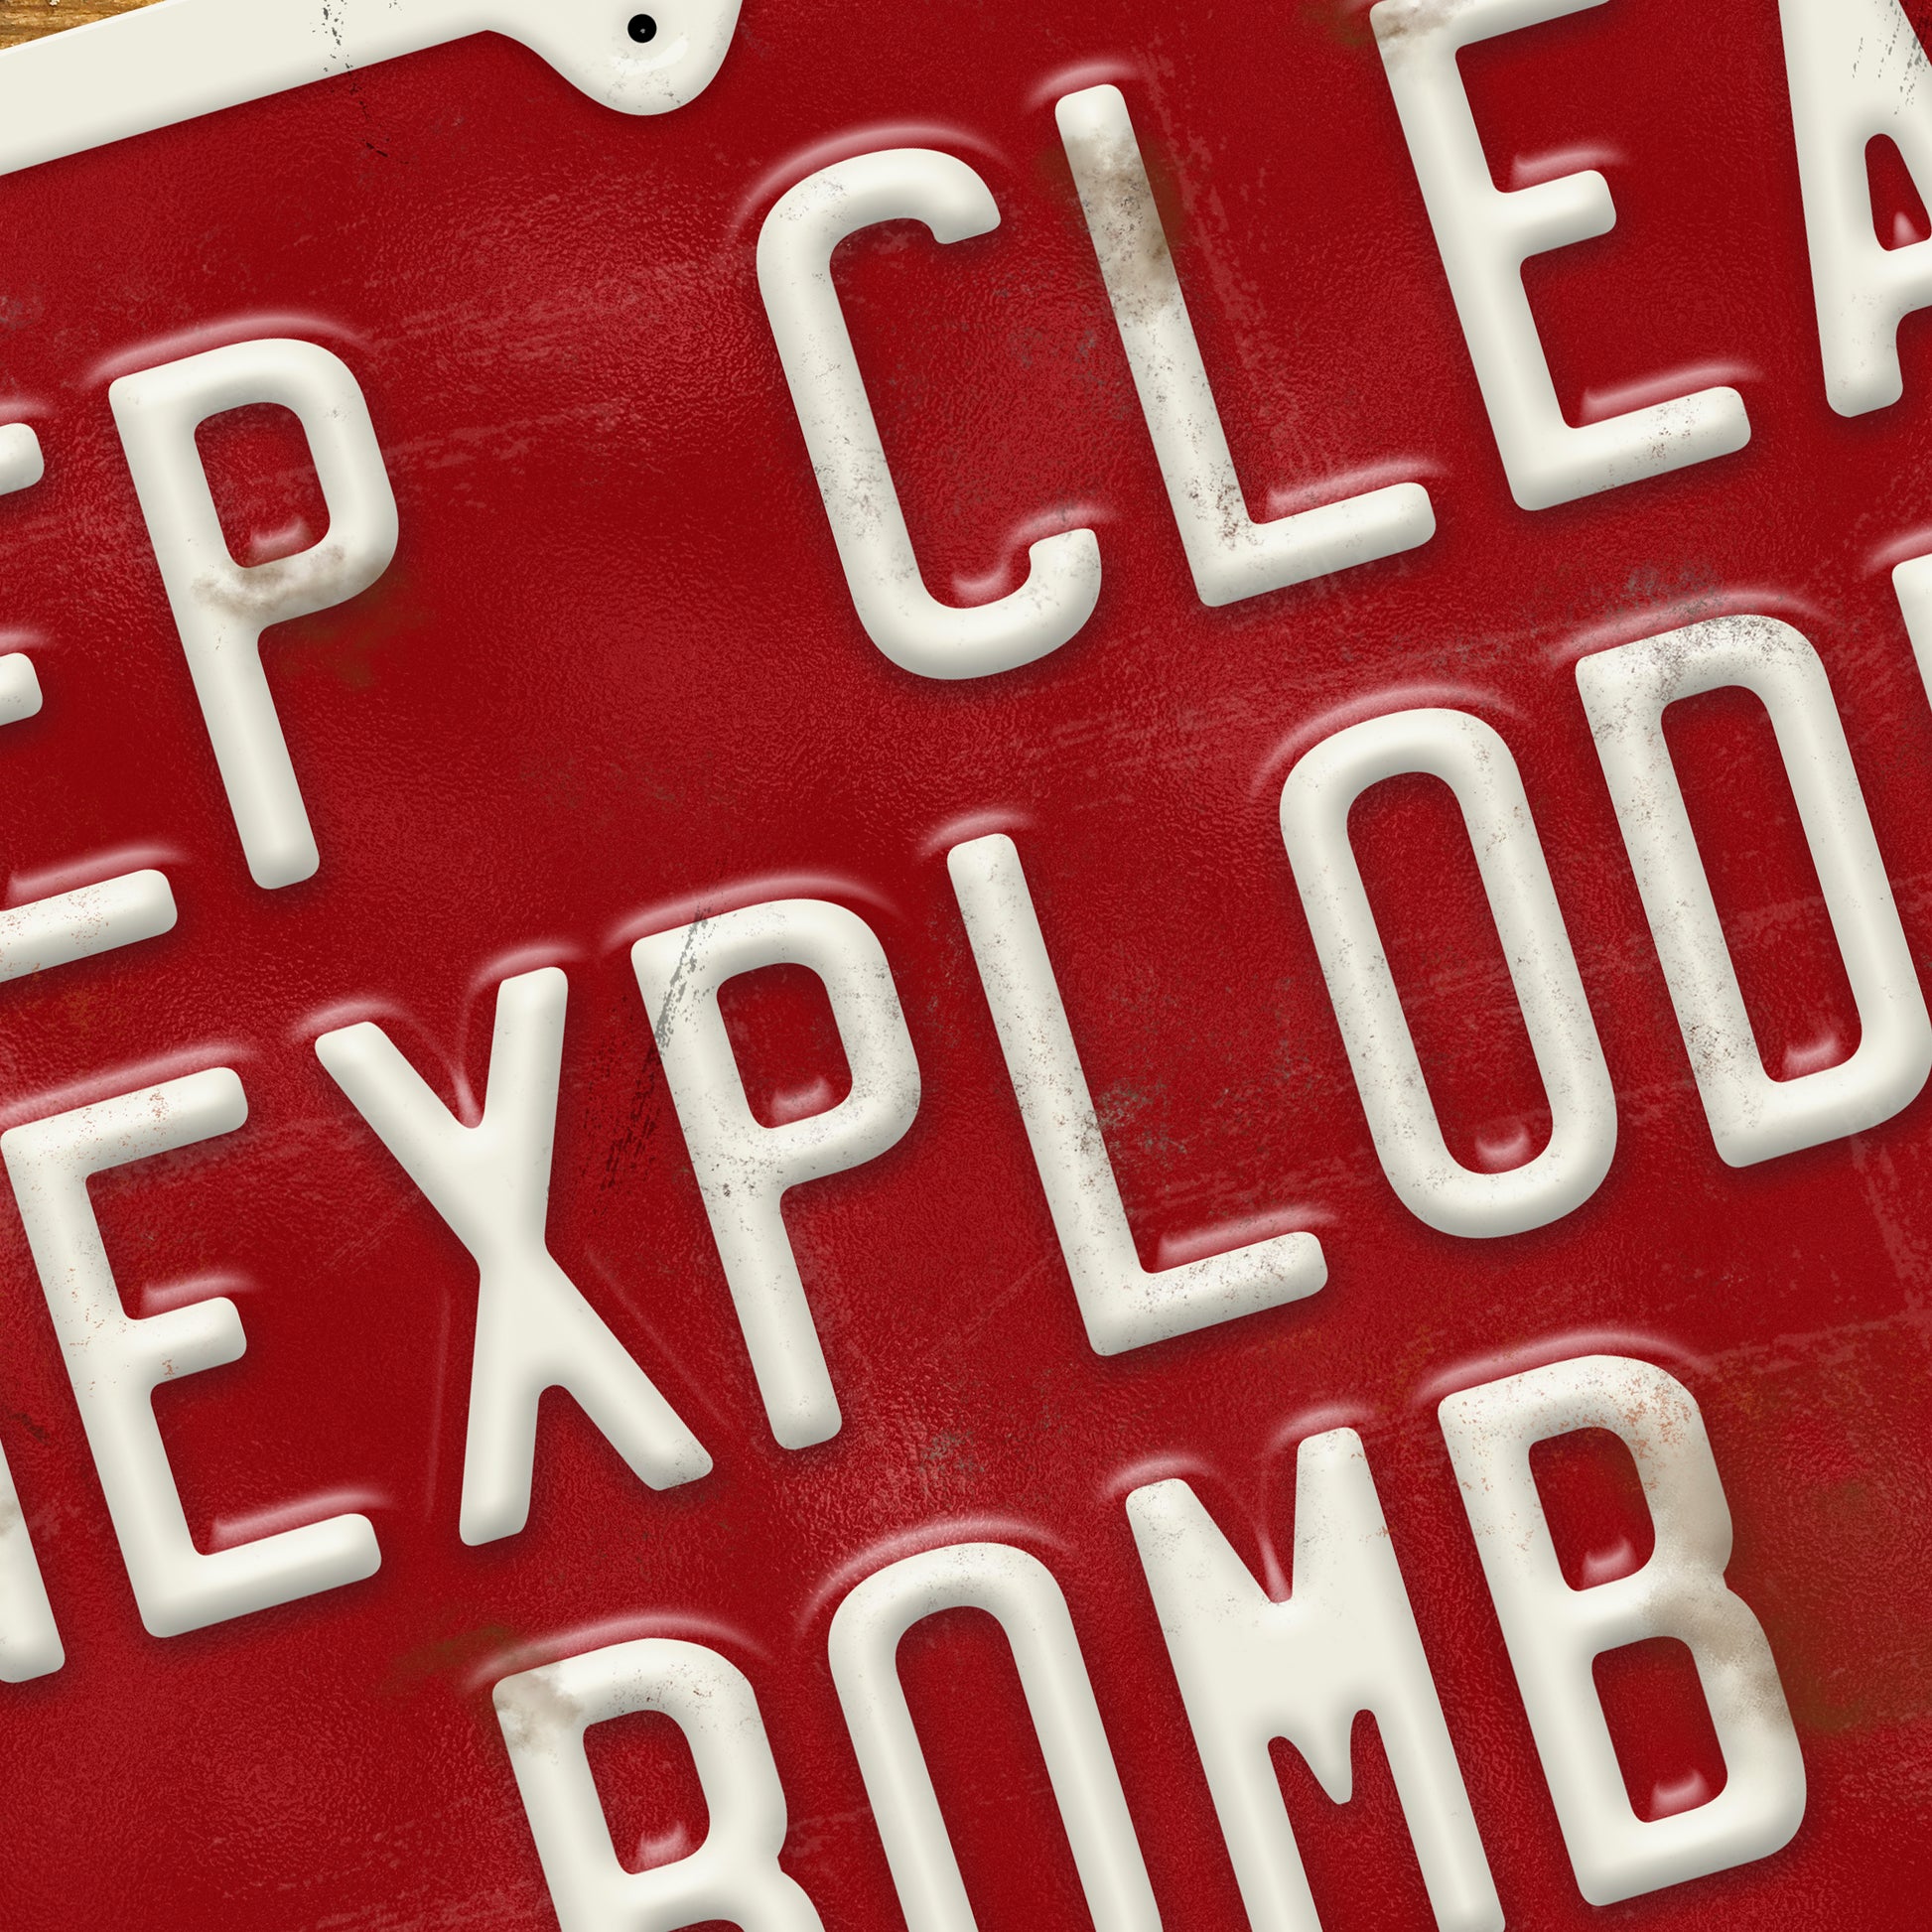 Man Cave Vintage Sign - World War 2 Unexploded Bomb Signage - Red and White Sign Close view 1